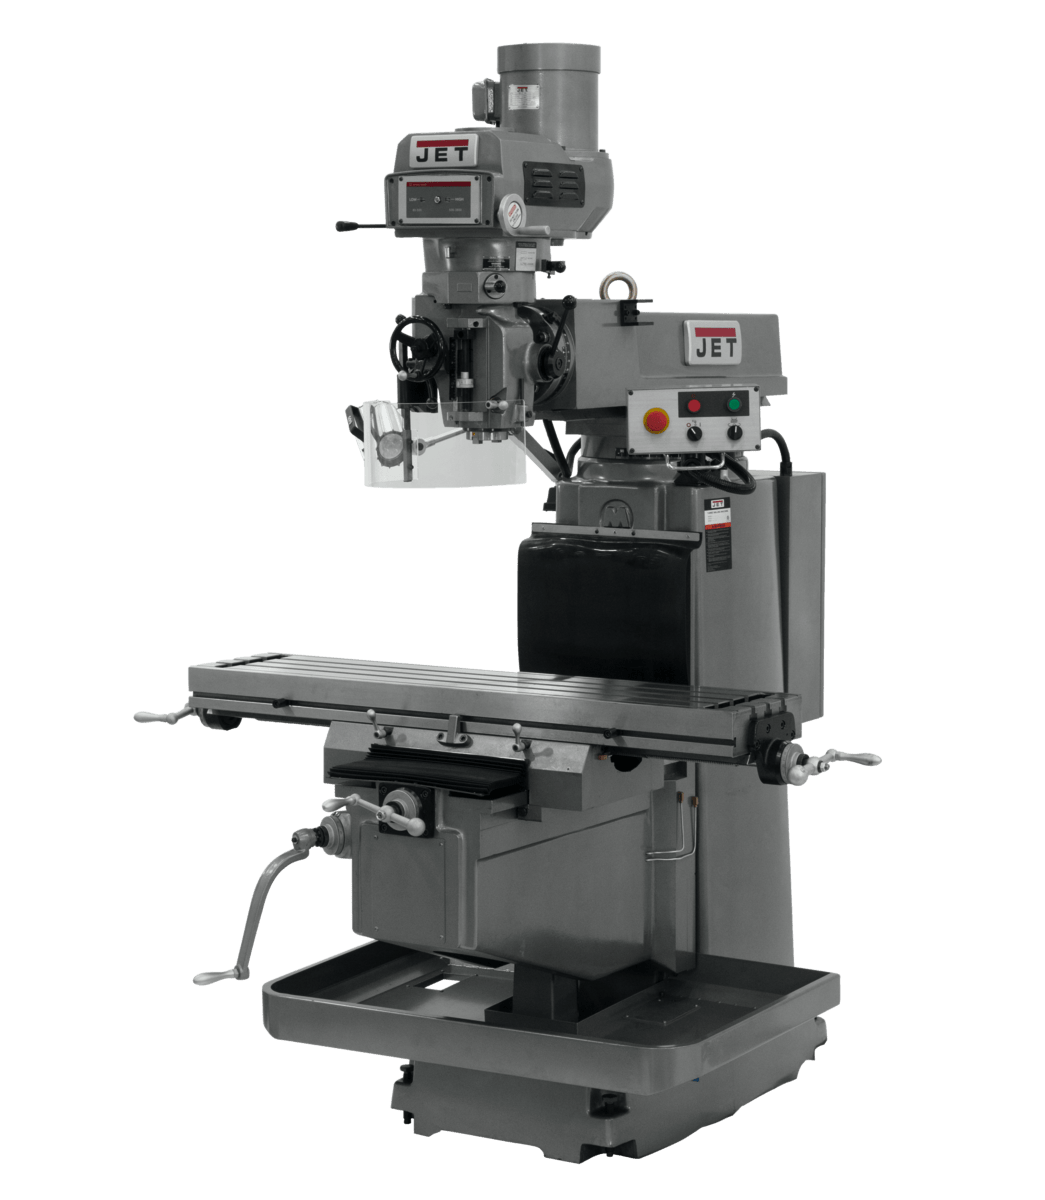 JTM-1254VS with 2-Axis ACU-RITE G-2 MILLPOWER CNC - Jet